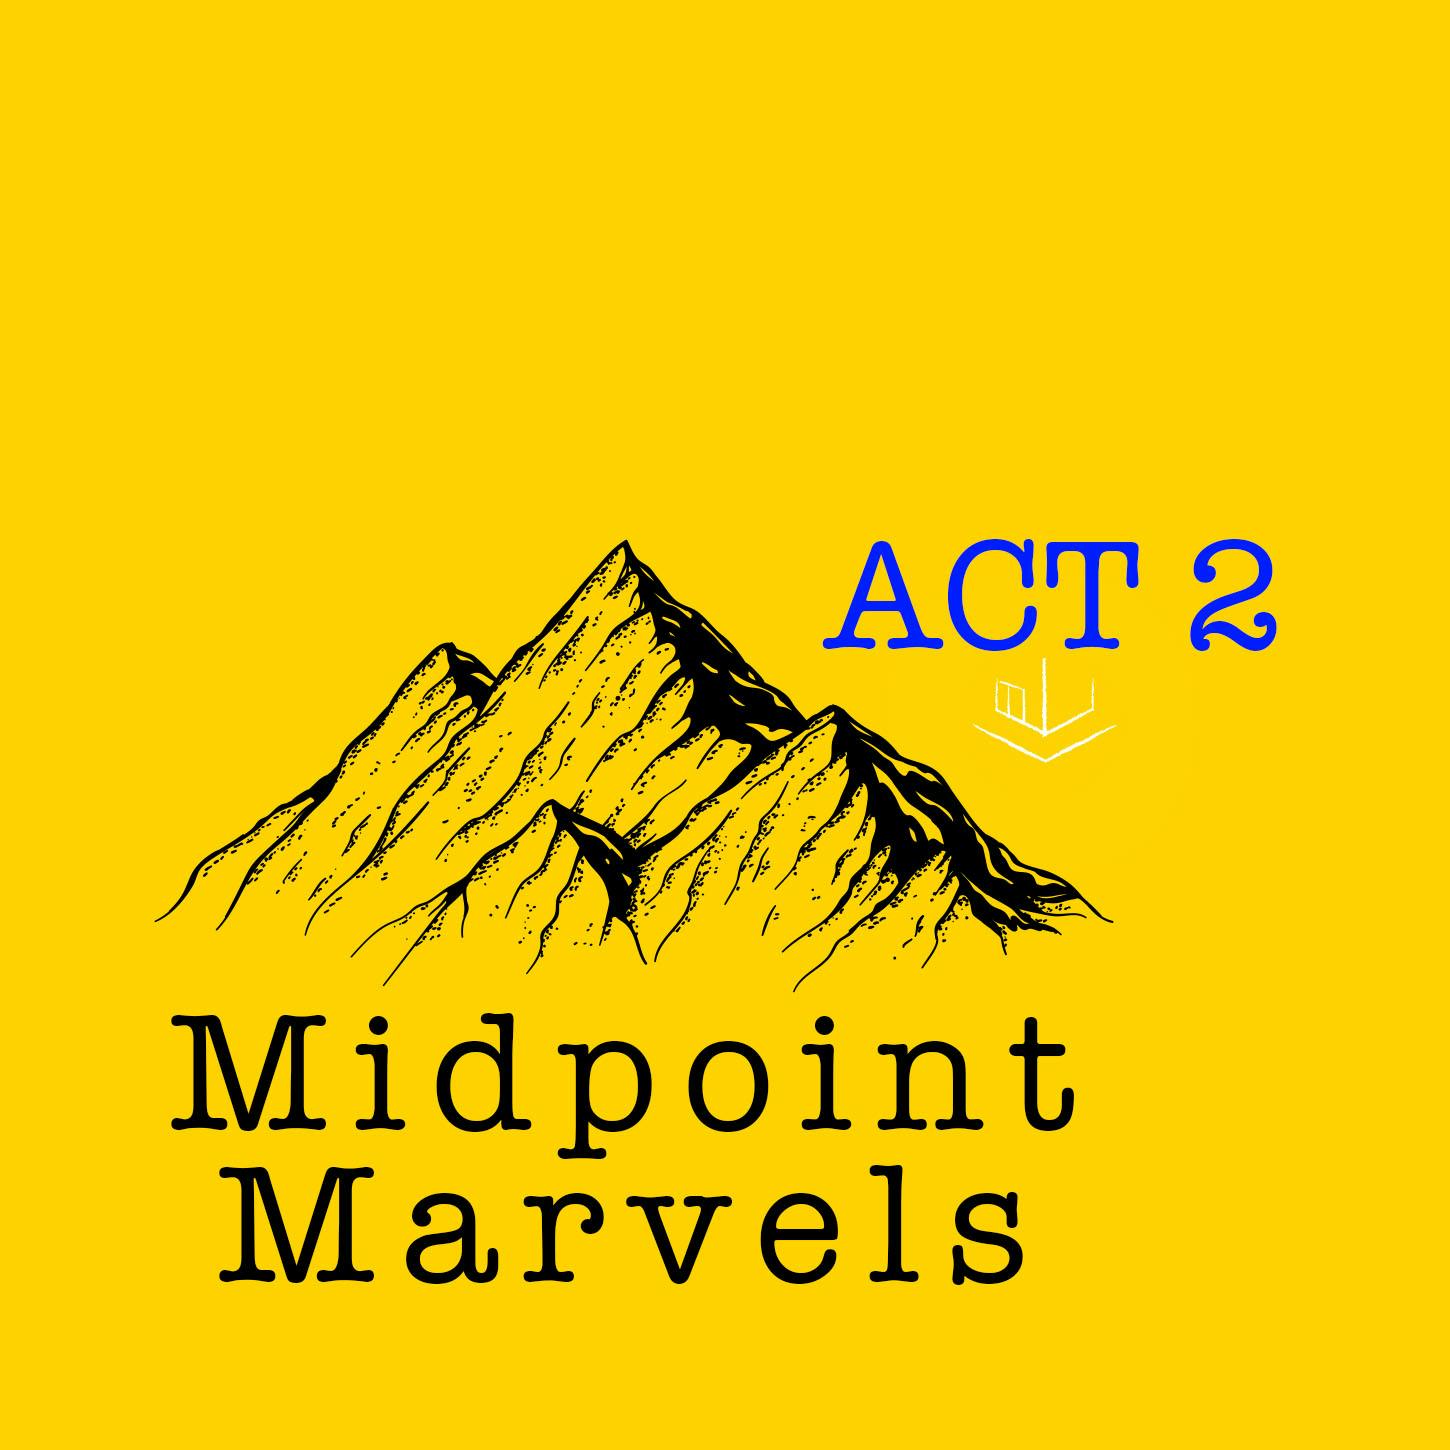 Lesson 22: Act 2 - Midpoint Marvels